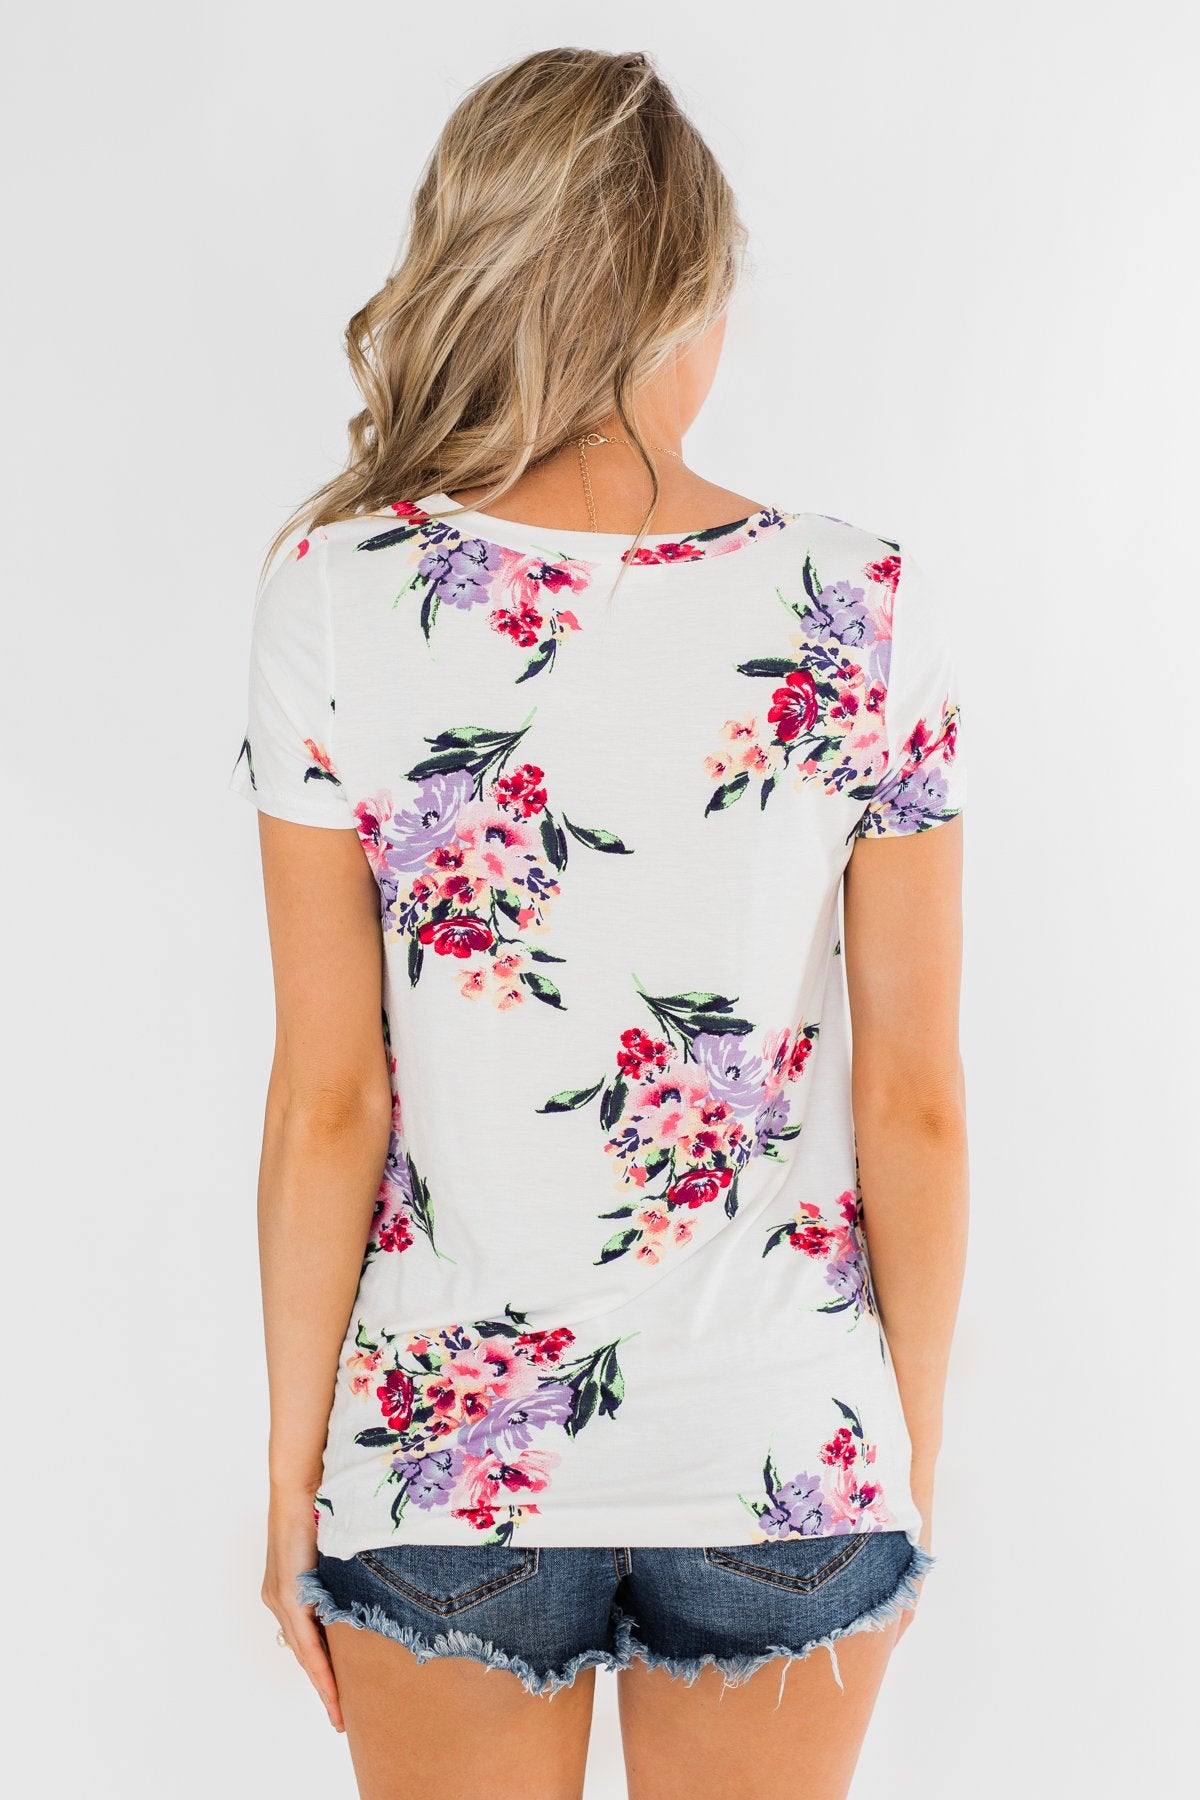 Take Your Time Floral Knot Top- White